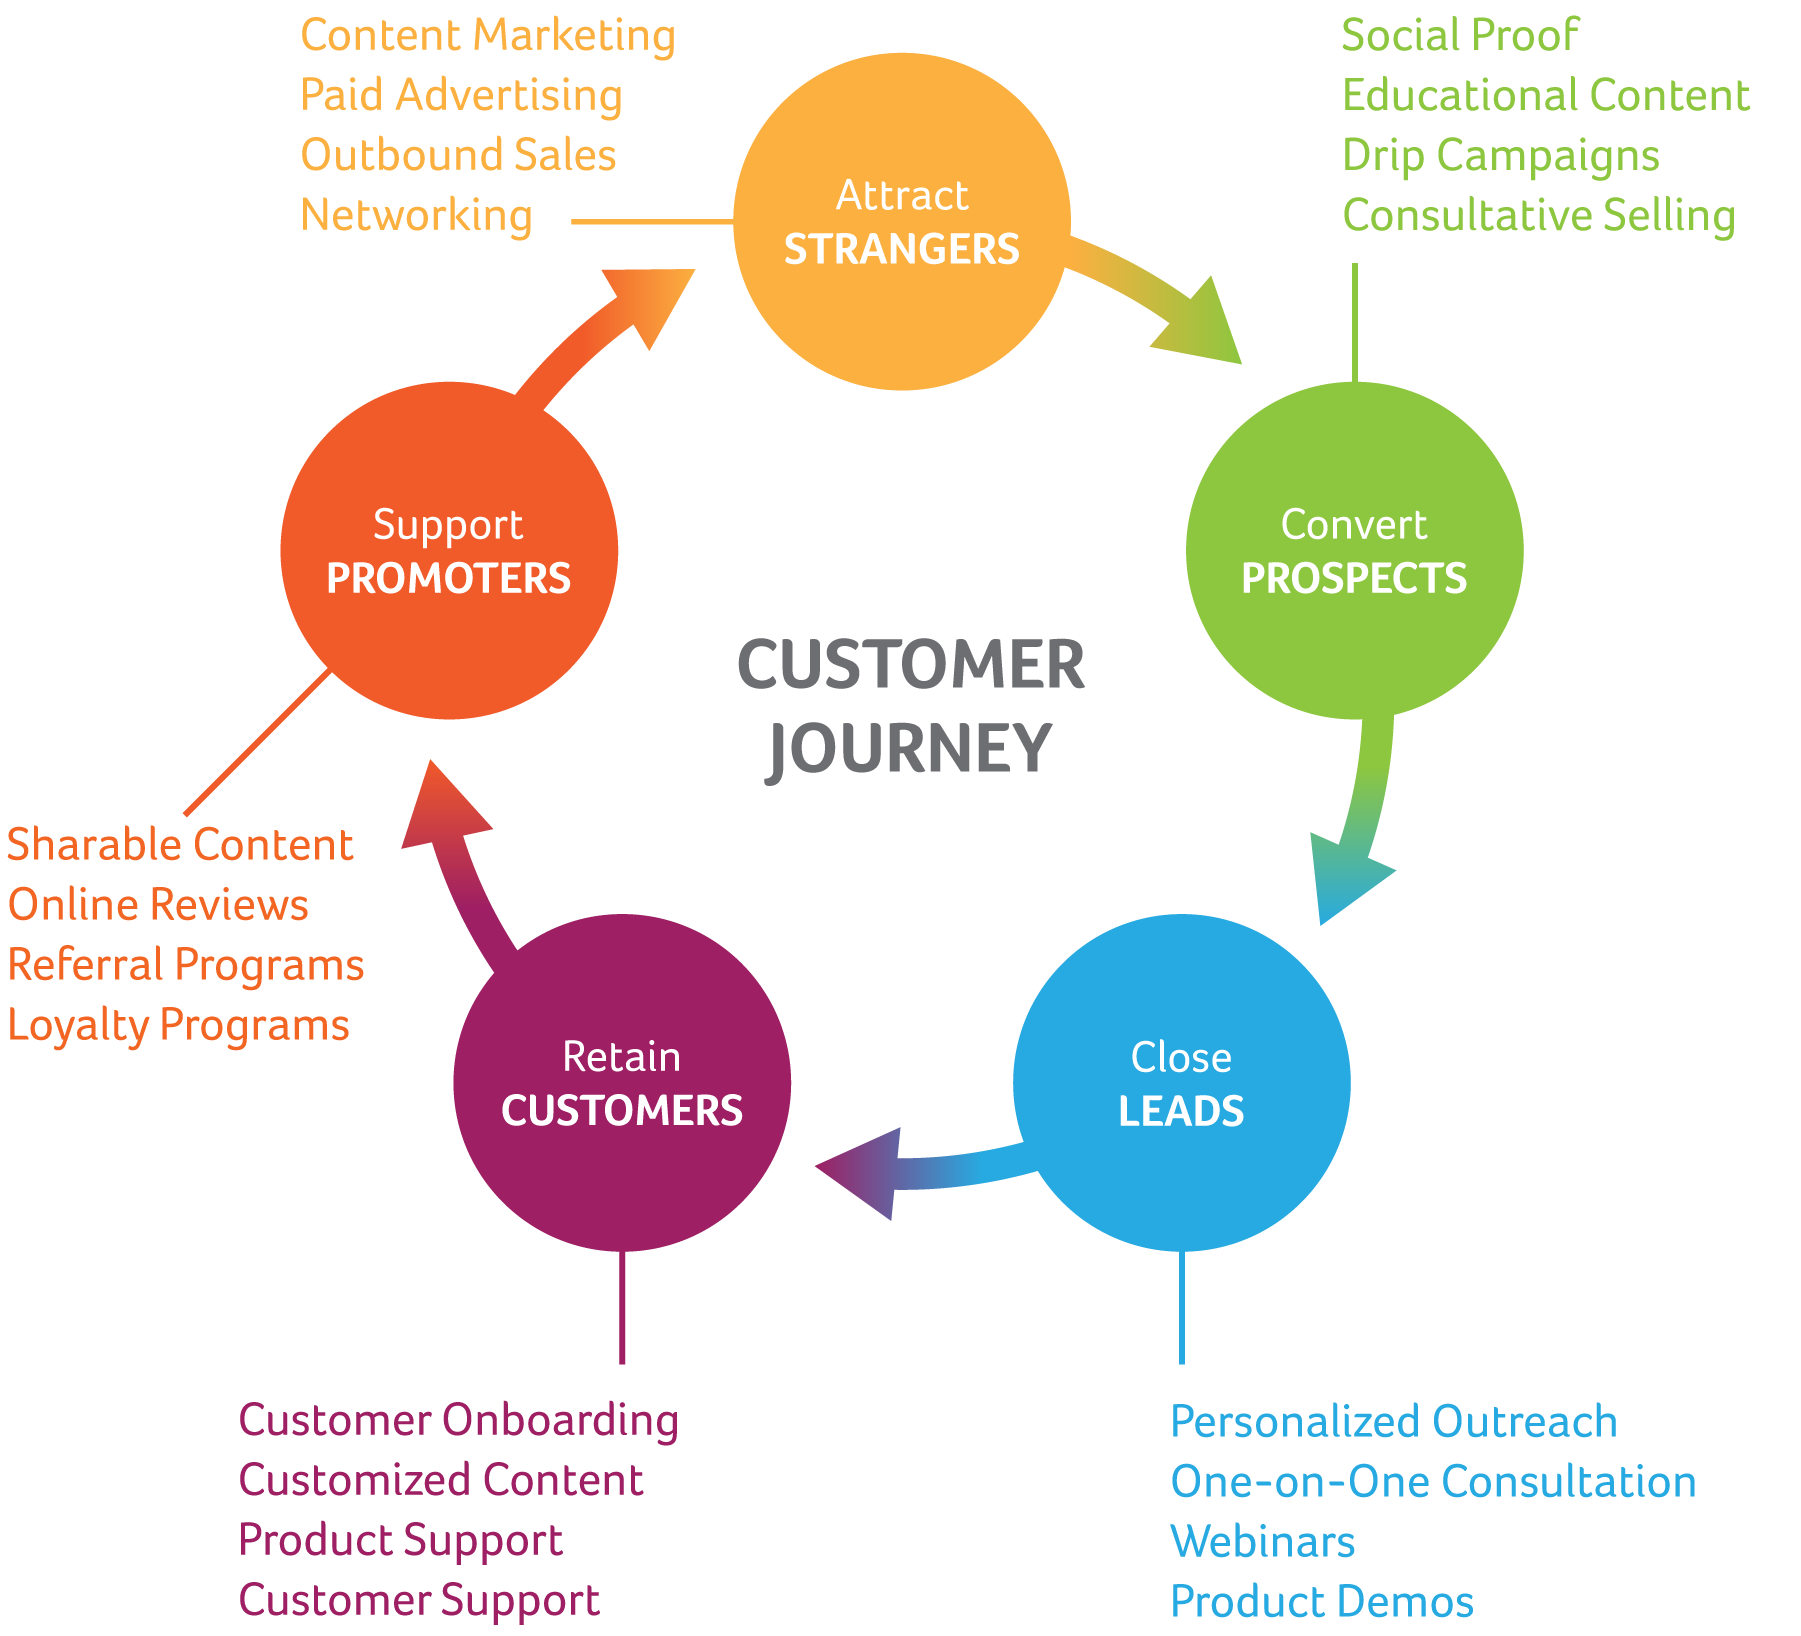 A cyclical customer journey allows for the continuation of a relationship with your clients. Having a strategy around which marketing channels are activated driven by the intent of the touchpoint provides a consistent journey for your client.